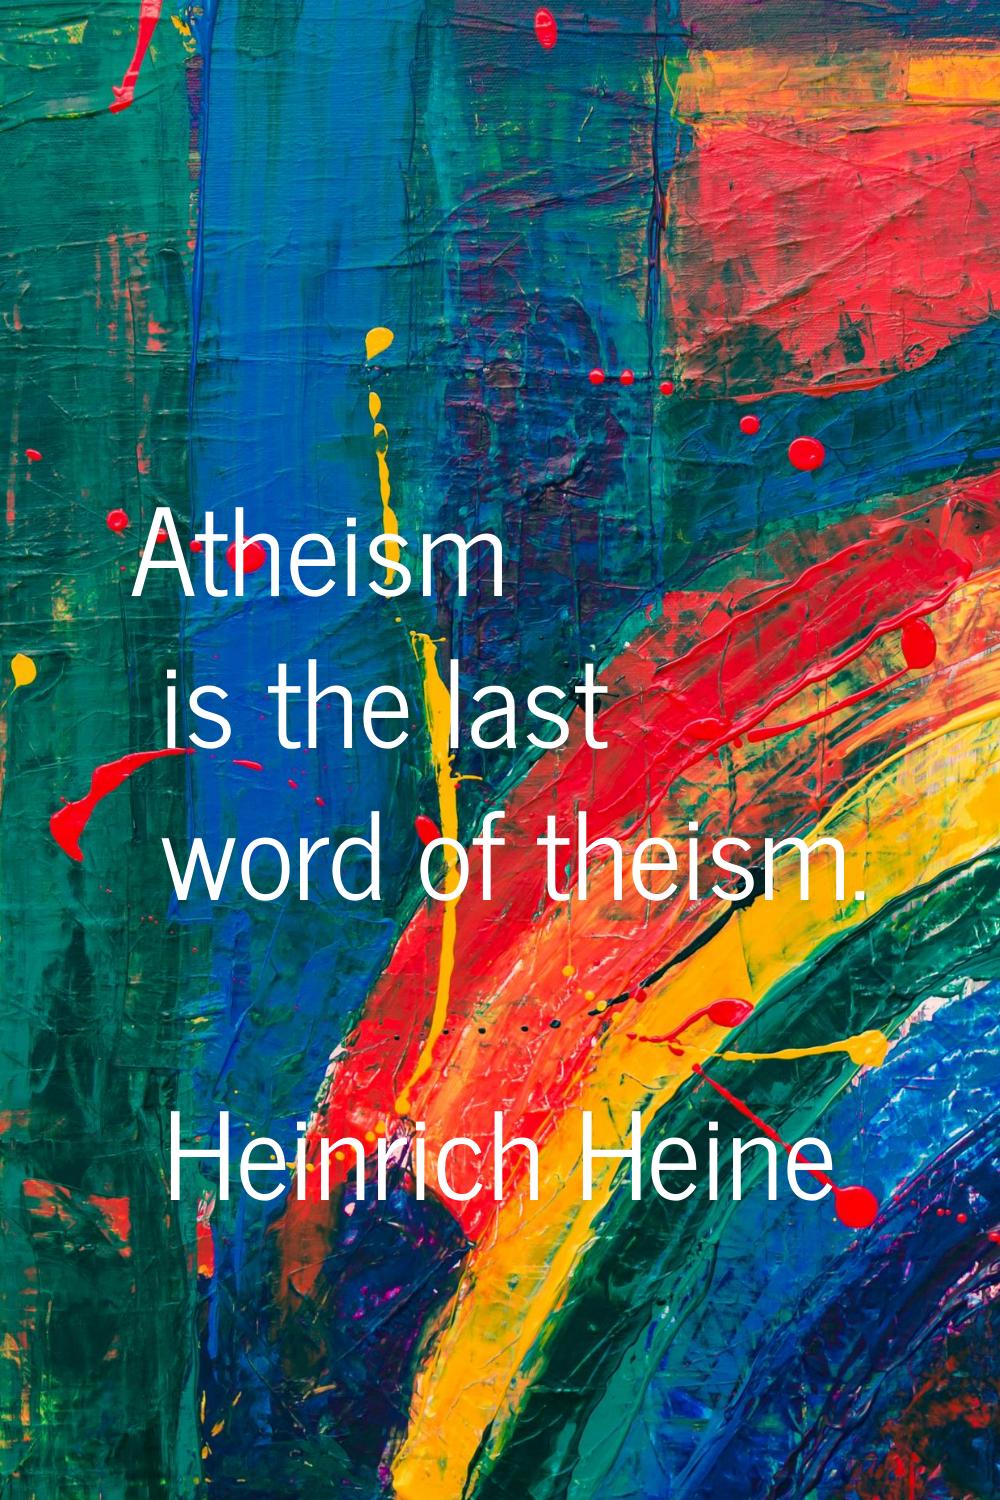 Atheism is the last word of theism.